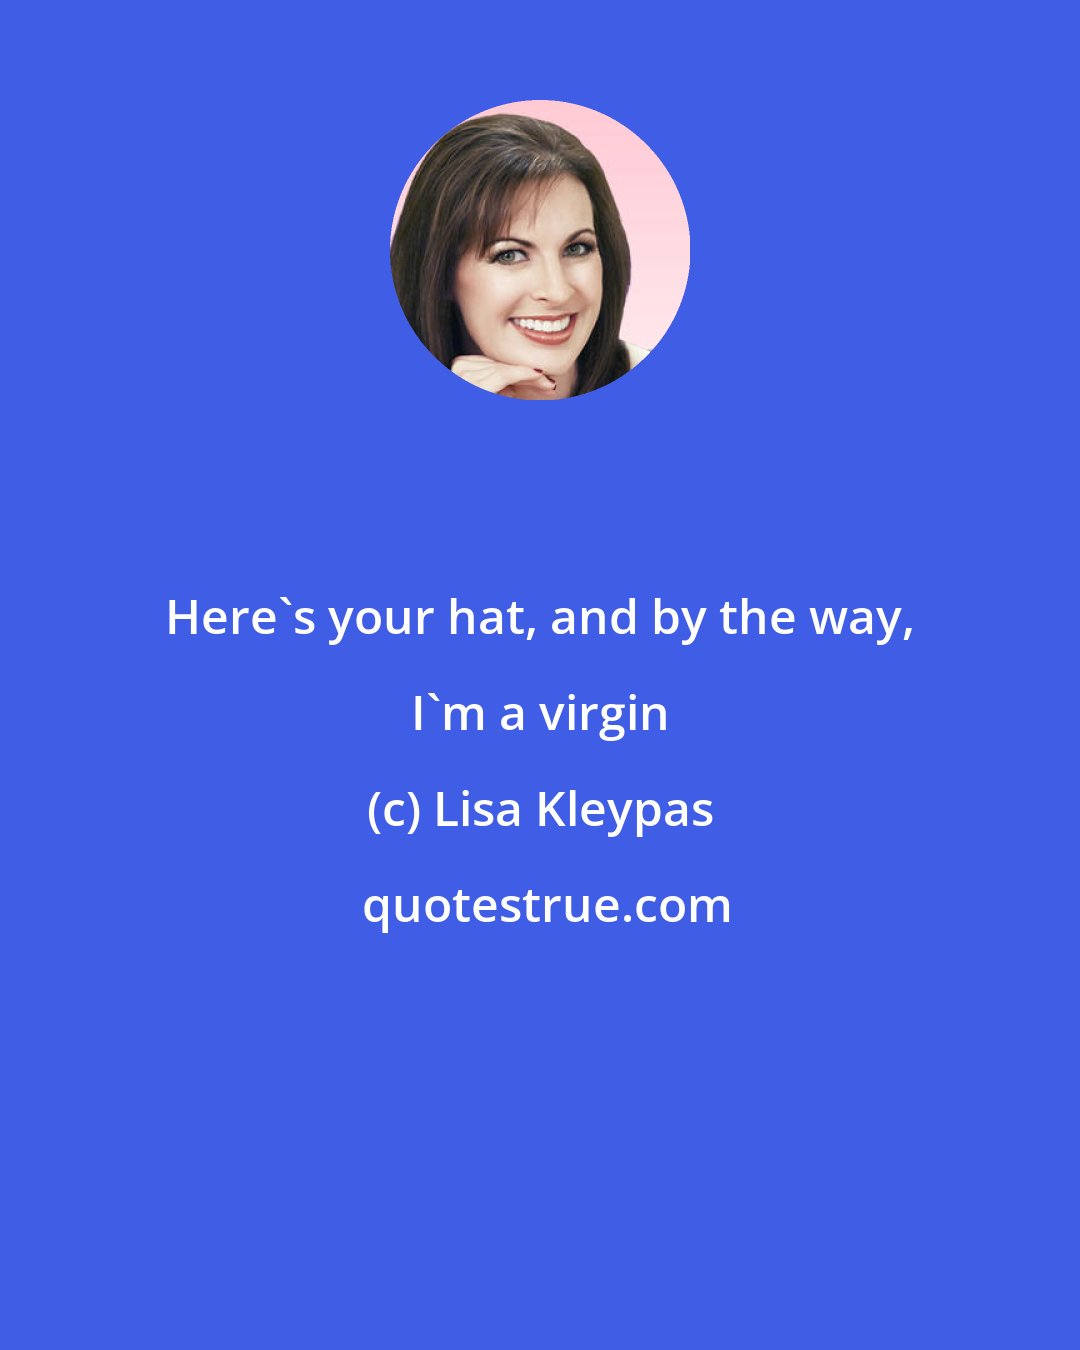 Lisa Kleypas: Here's your hat, and by the way, I'm a virgin